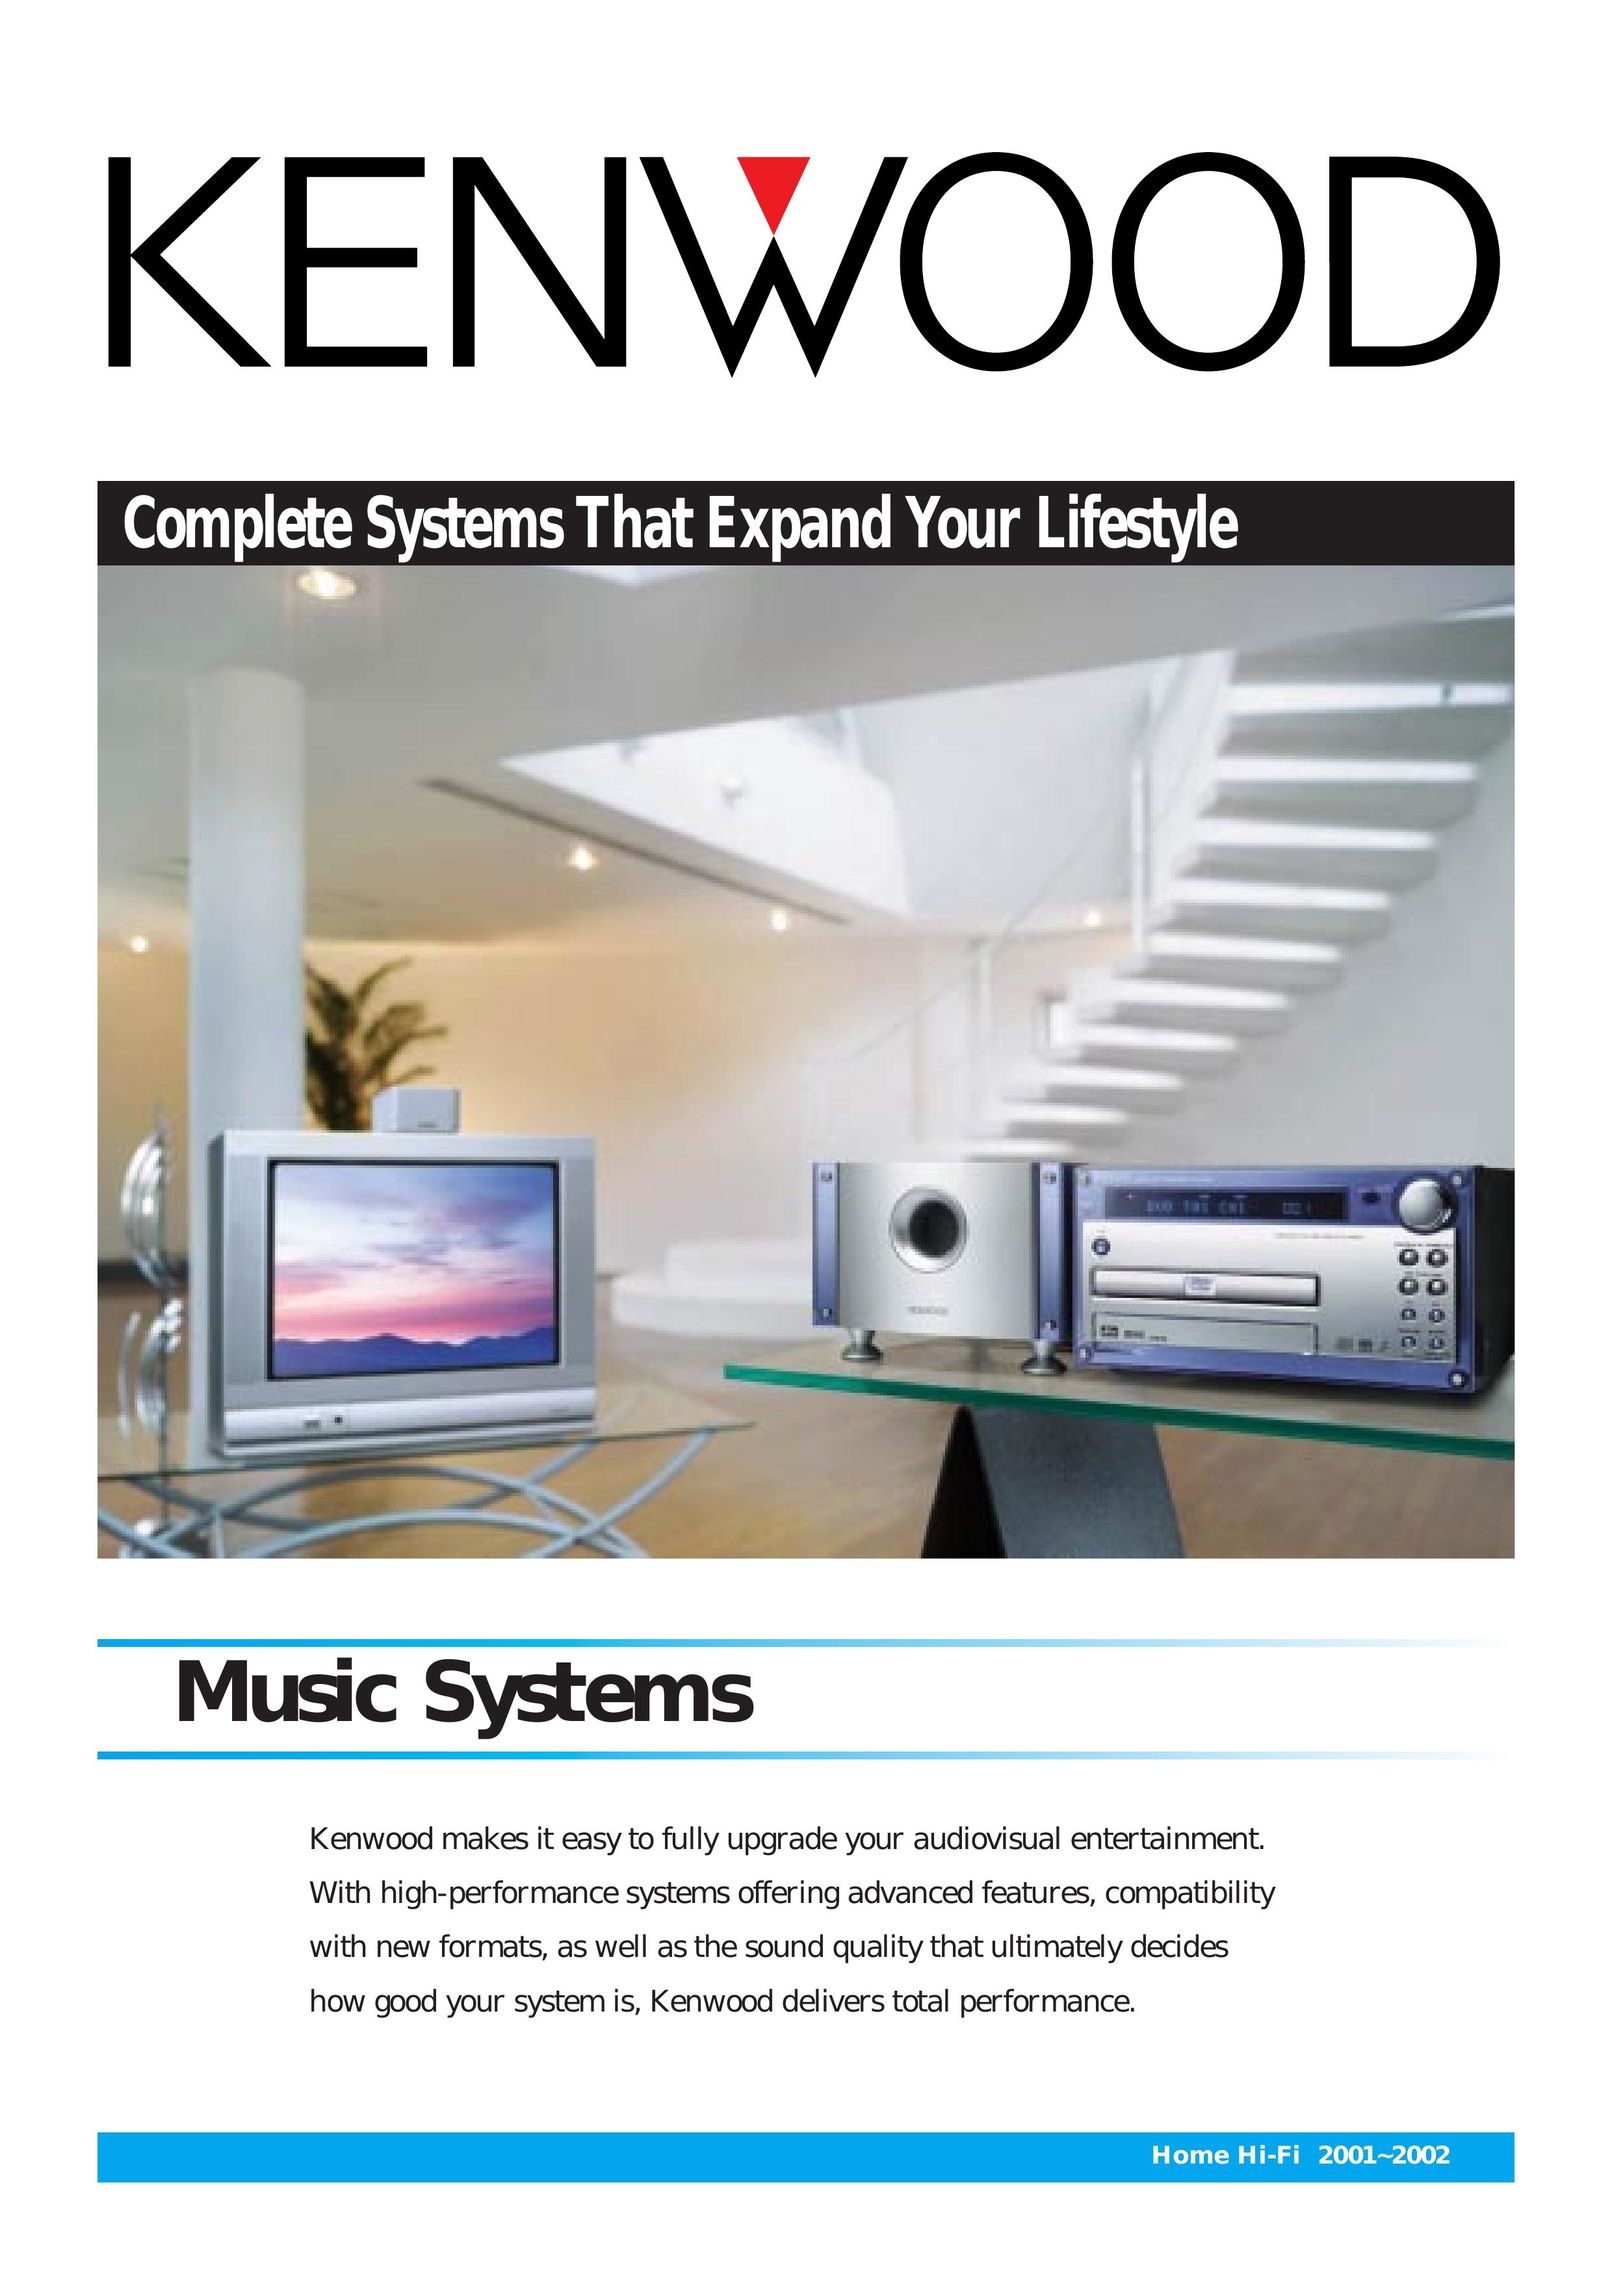 Kenwood HM-383MD Stereo System User Manual